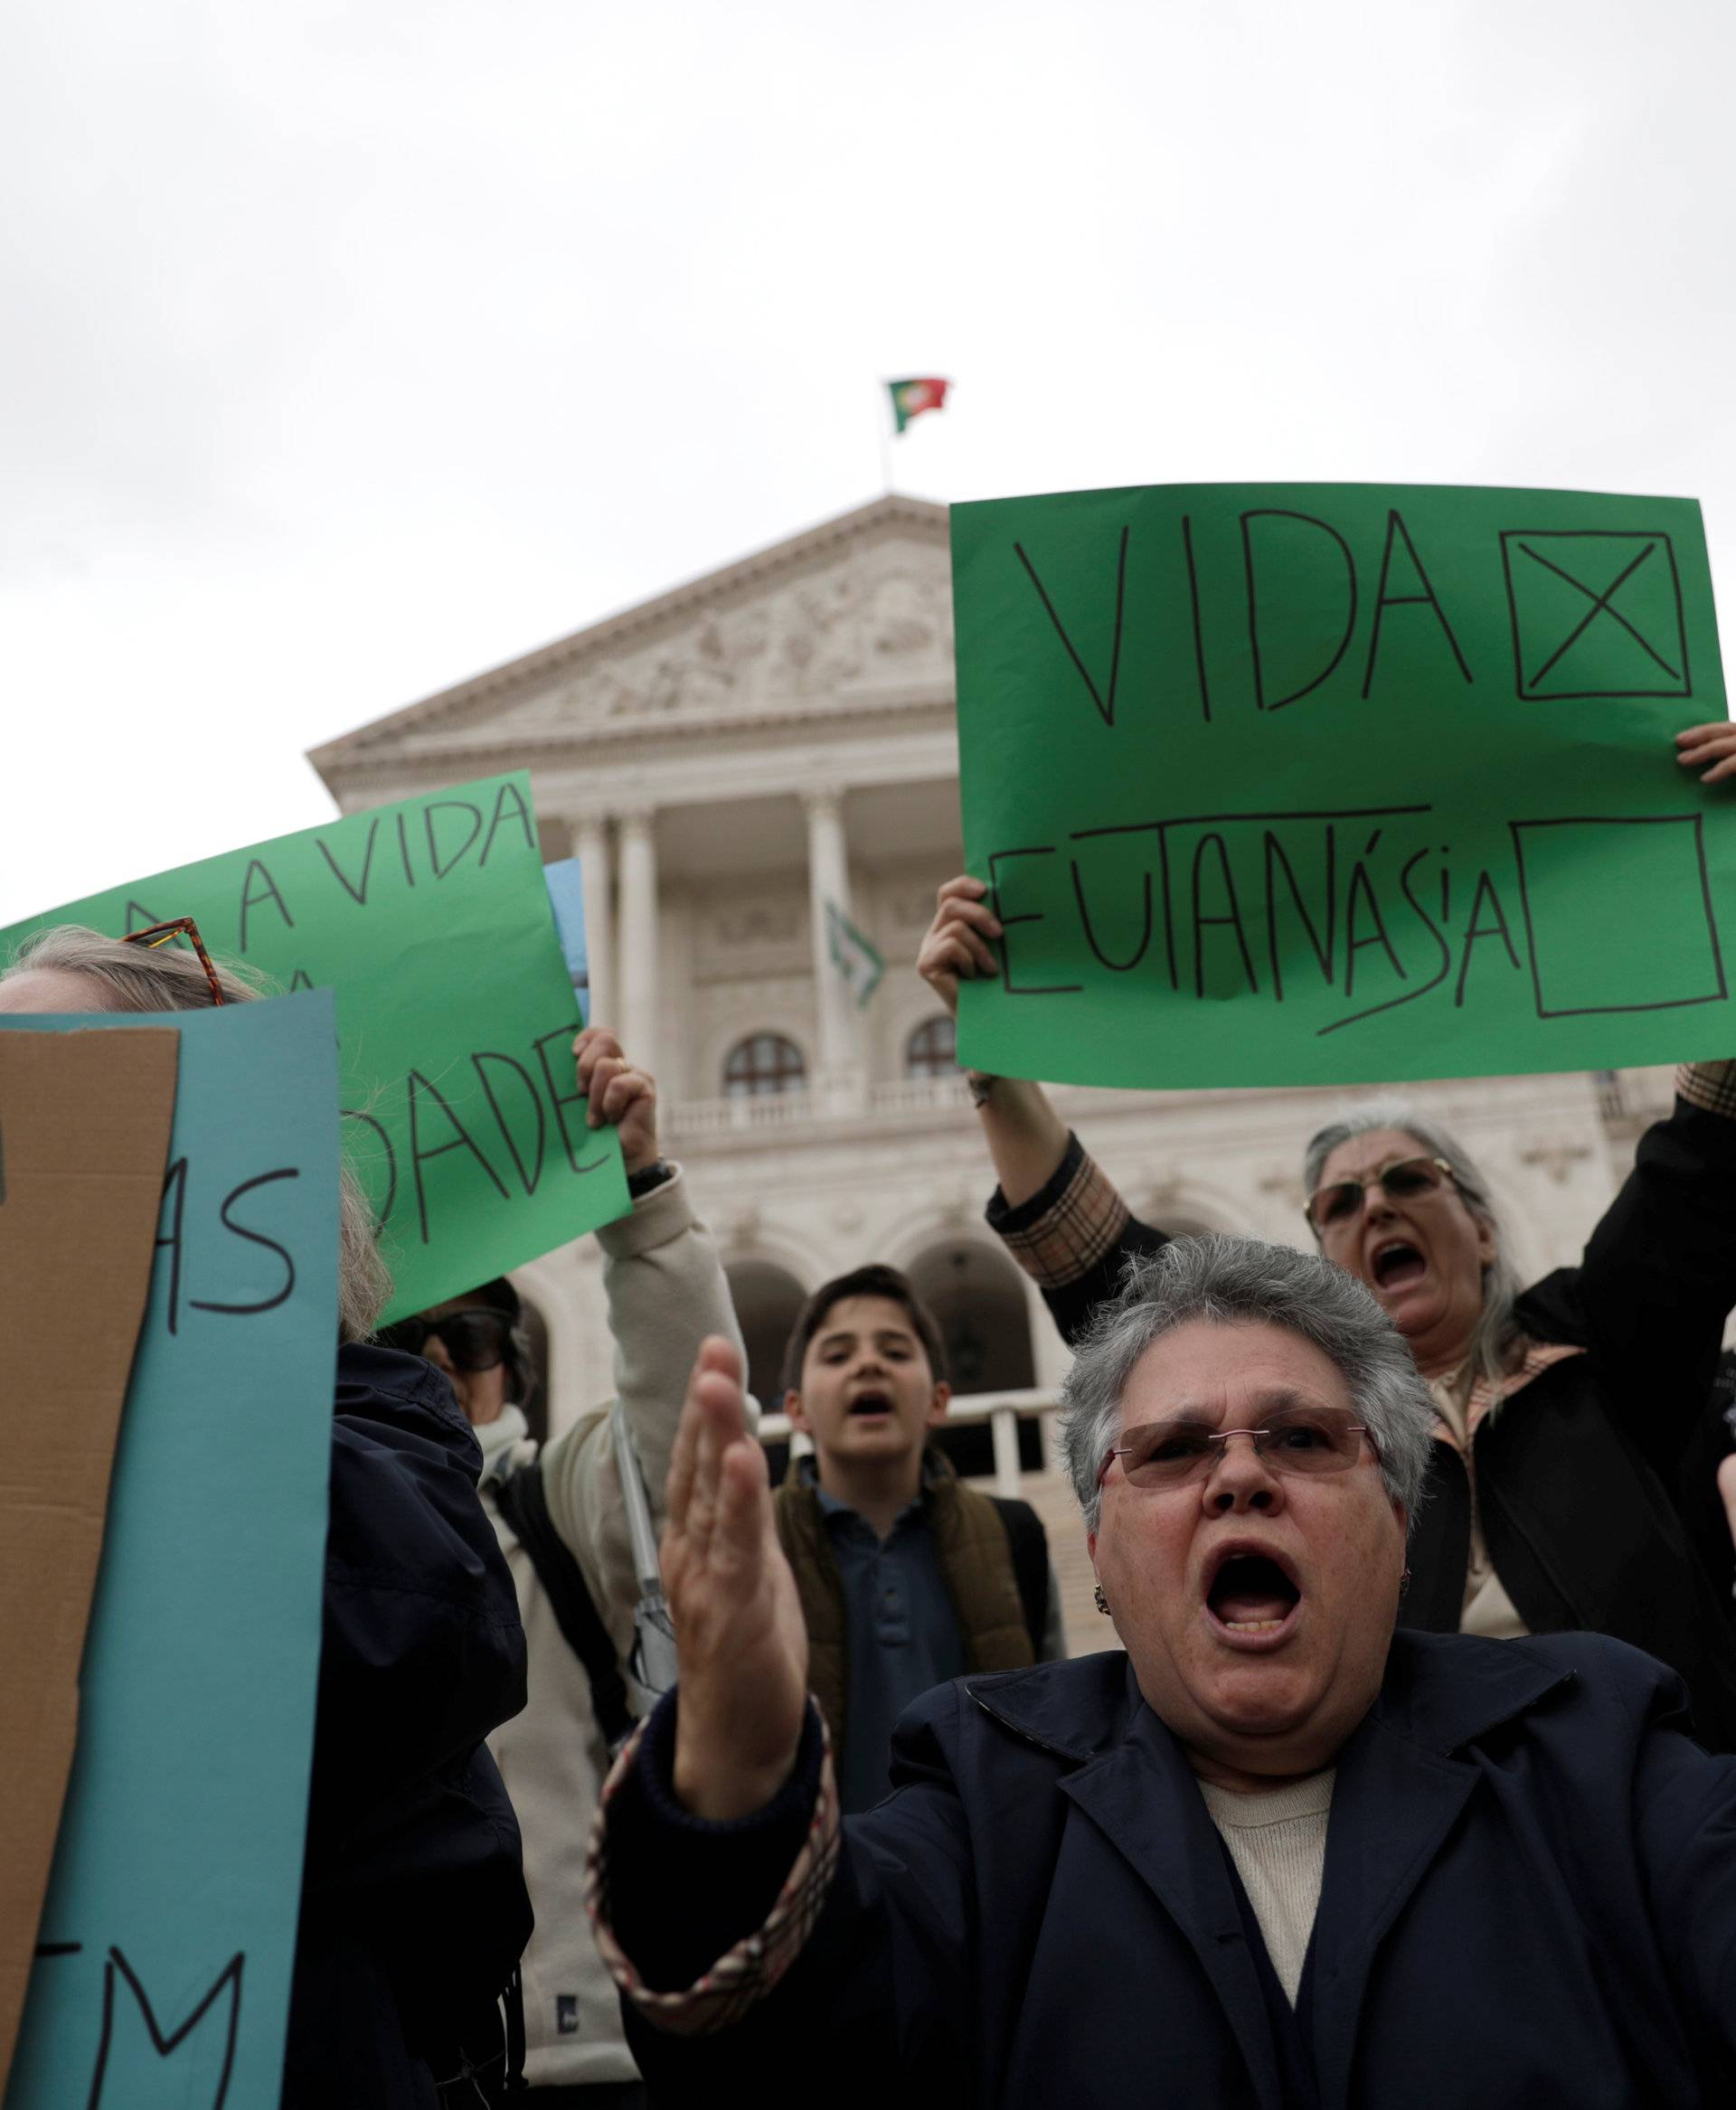 Demonstrators attend a protest against euthanasia in front off the parliament in Lisbon